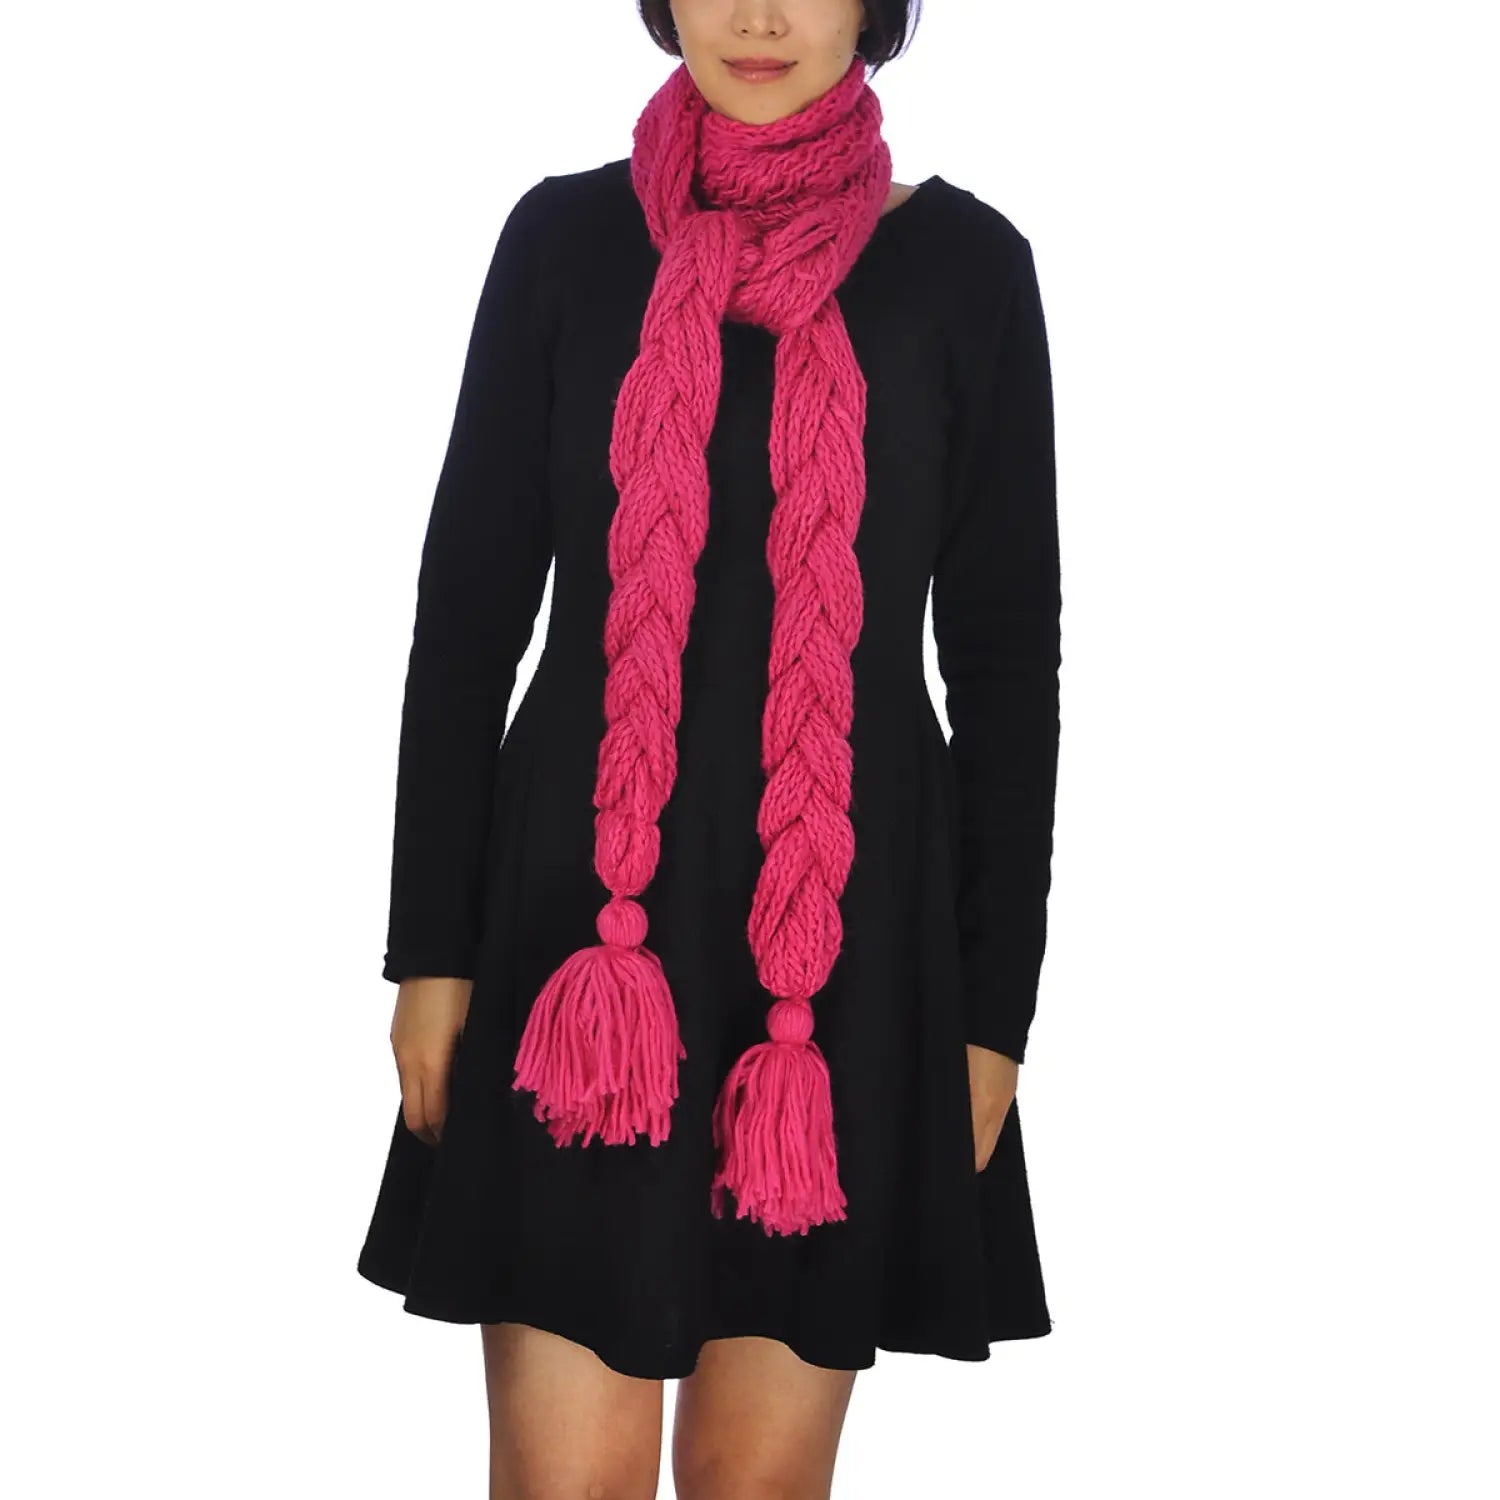 Oversized long plait knitted scarf, woman in black dress & pink scarf